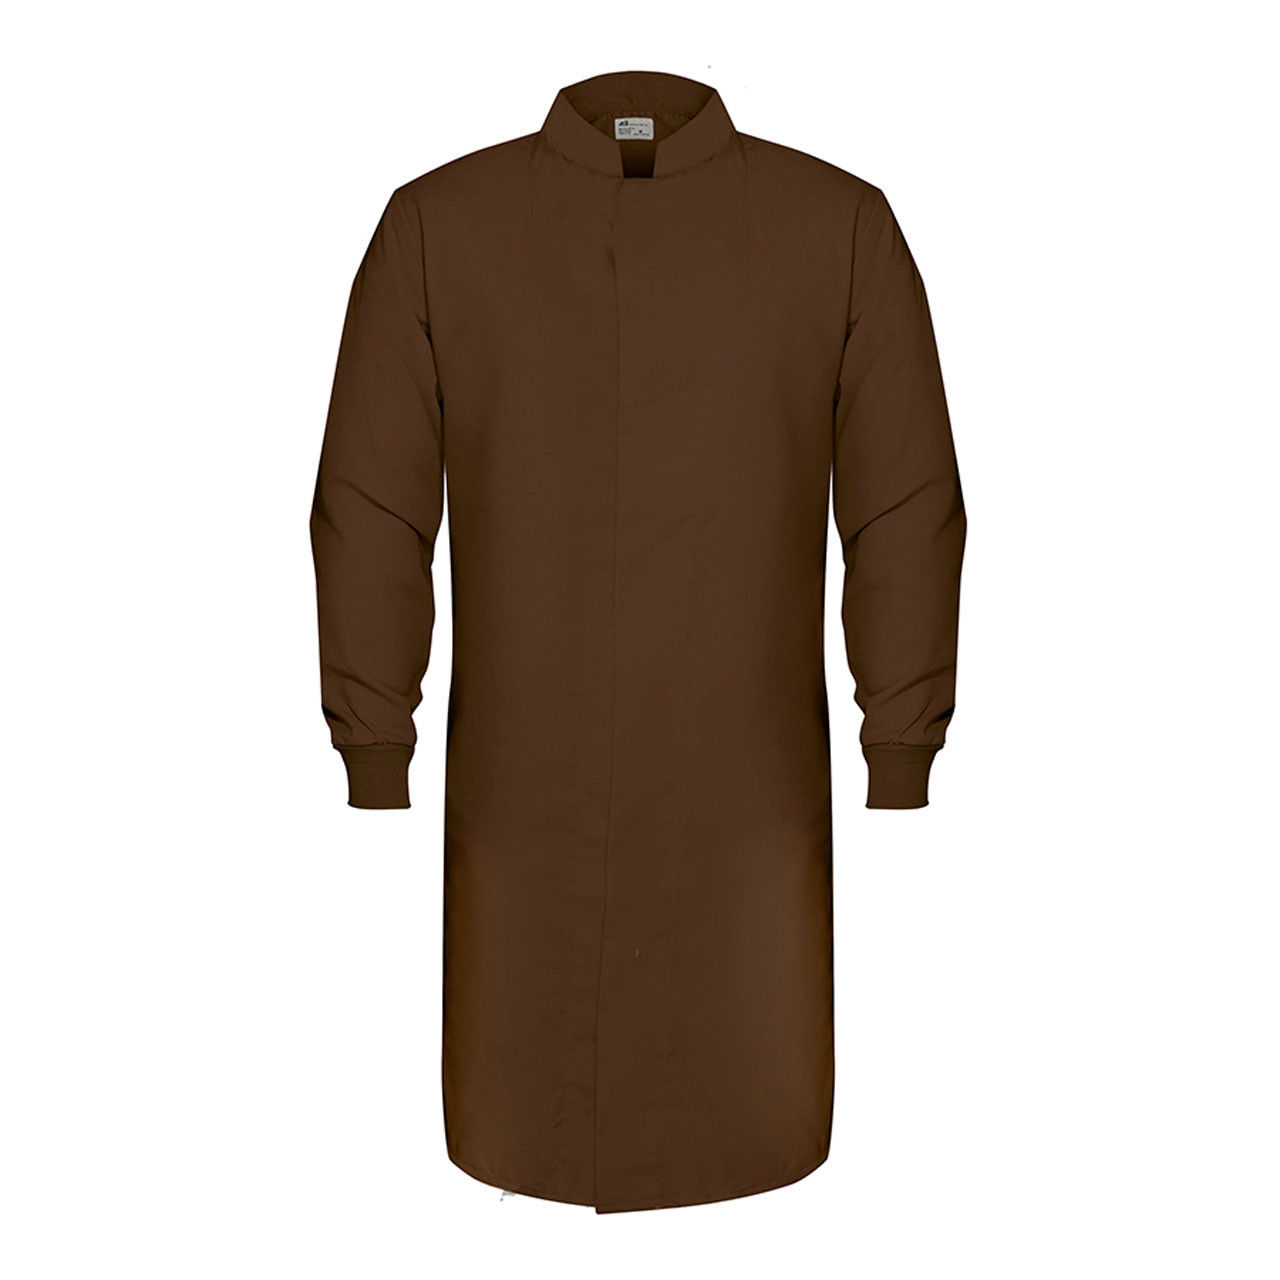 Is this brown lab coat suitable for my intended use?